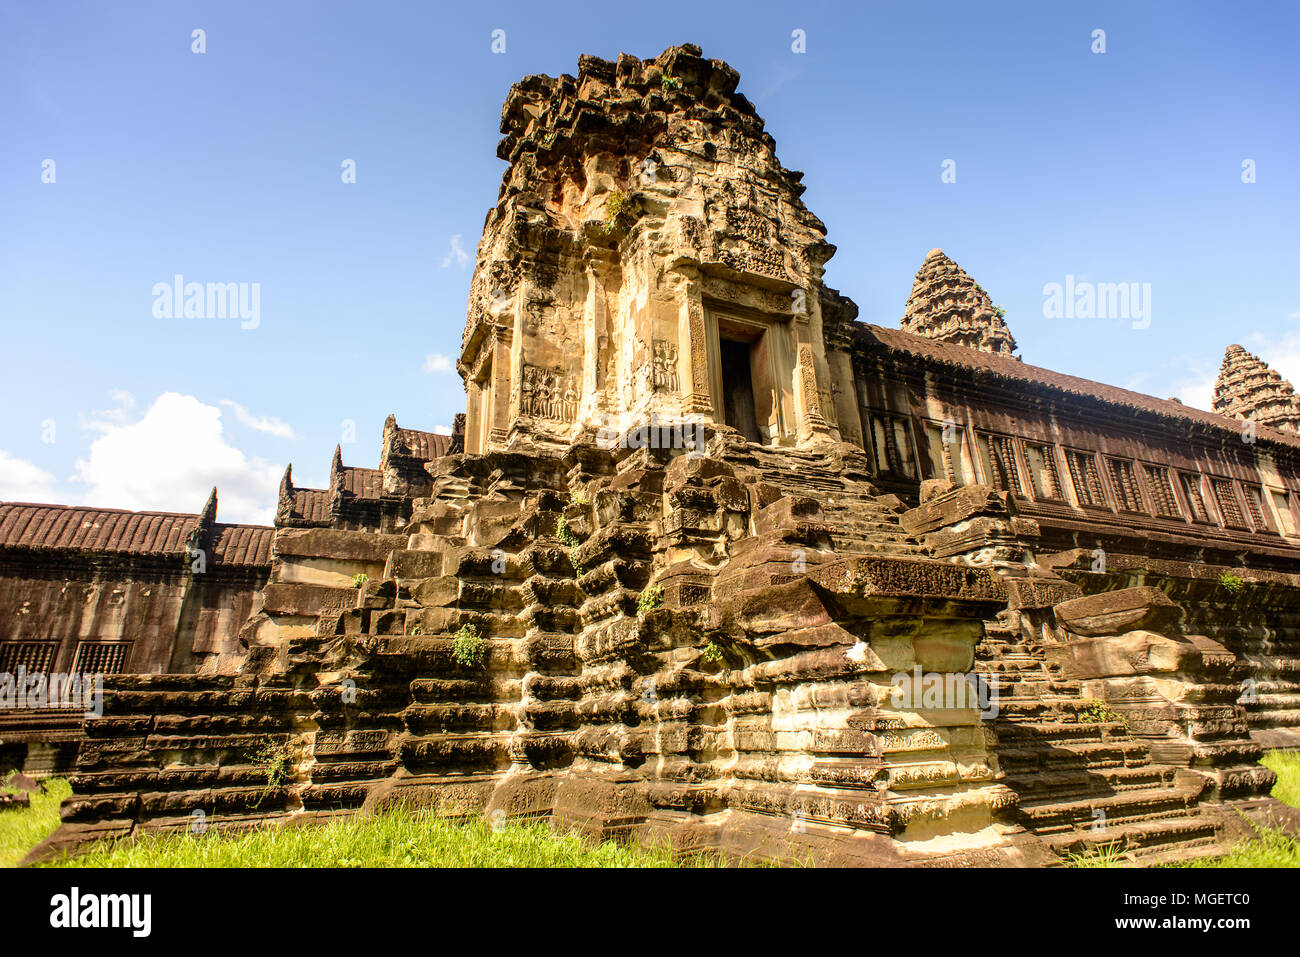 Wall of the Angkor Wat (Temple City), a Buddhist temple complex in Cambodia and the largest religious monument in the world. View from the garden Stock Photo